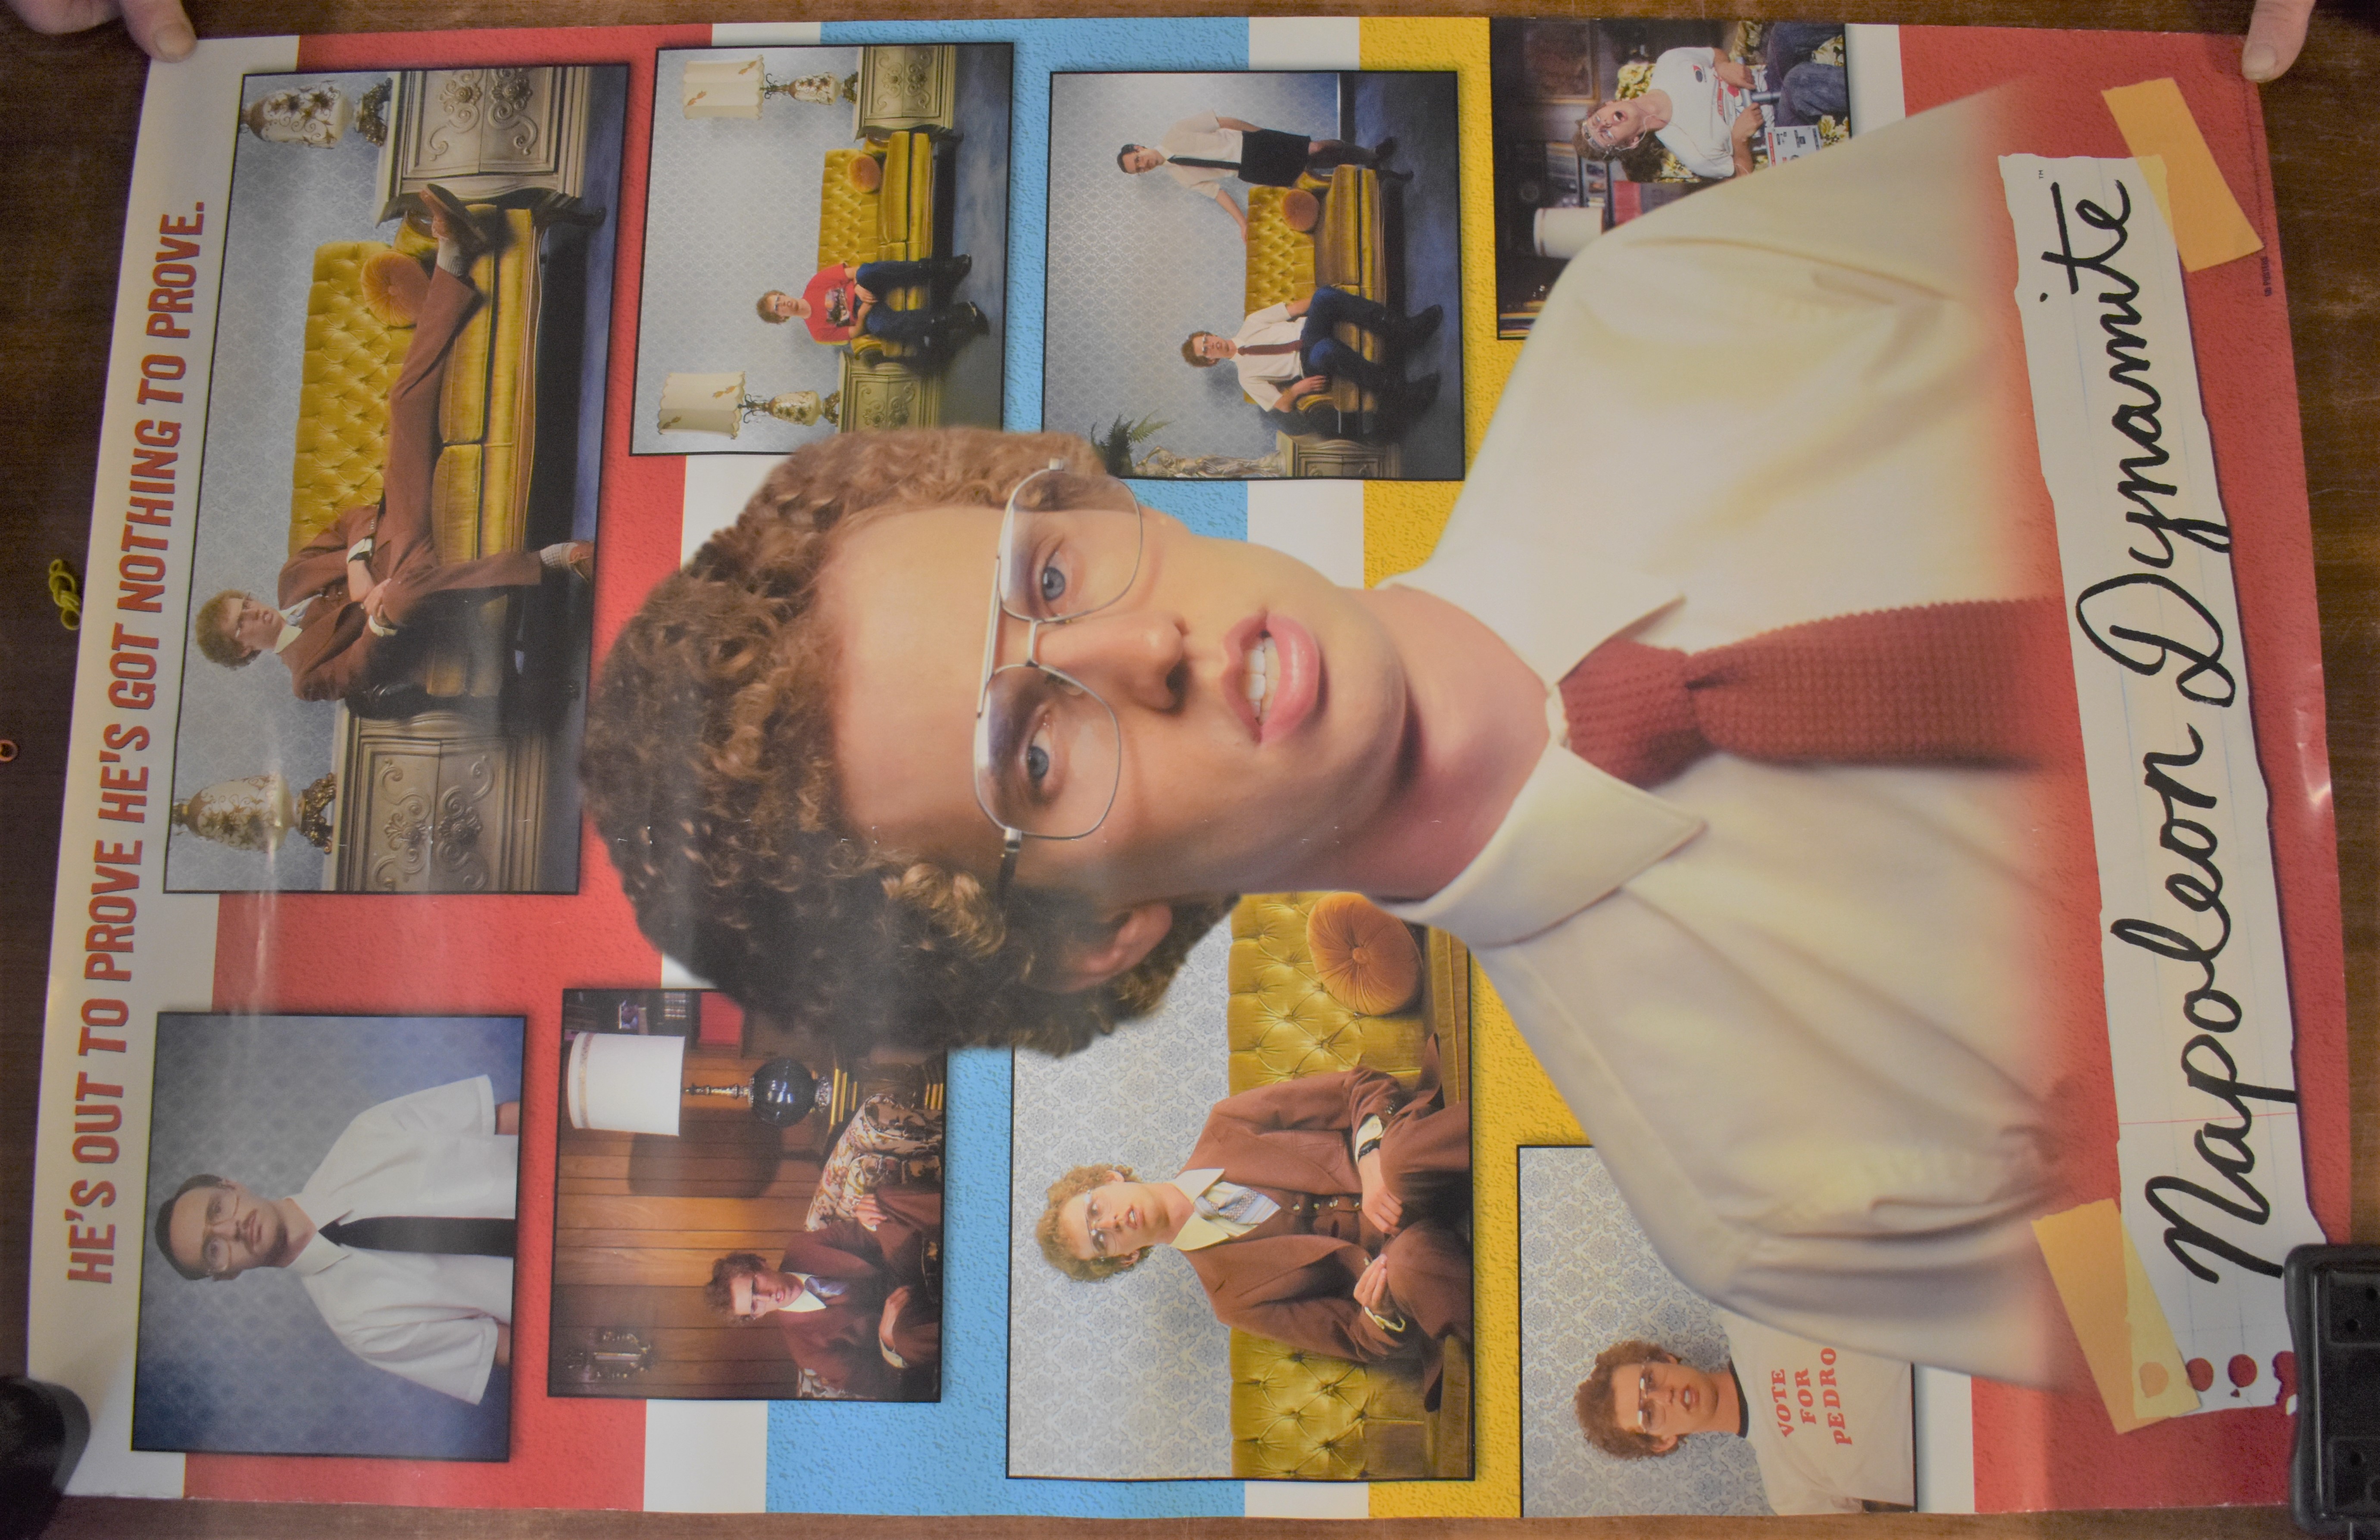 Napoleon Dynamite - Cinematic release poster, starring Jon Heder & Jon Gries. Released in the USA